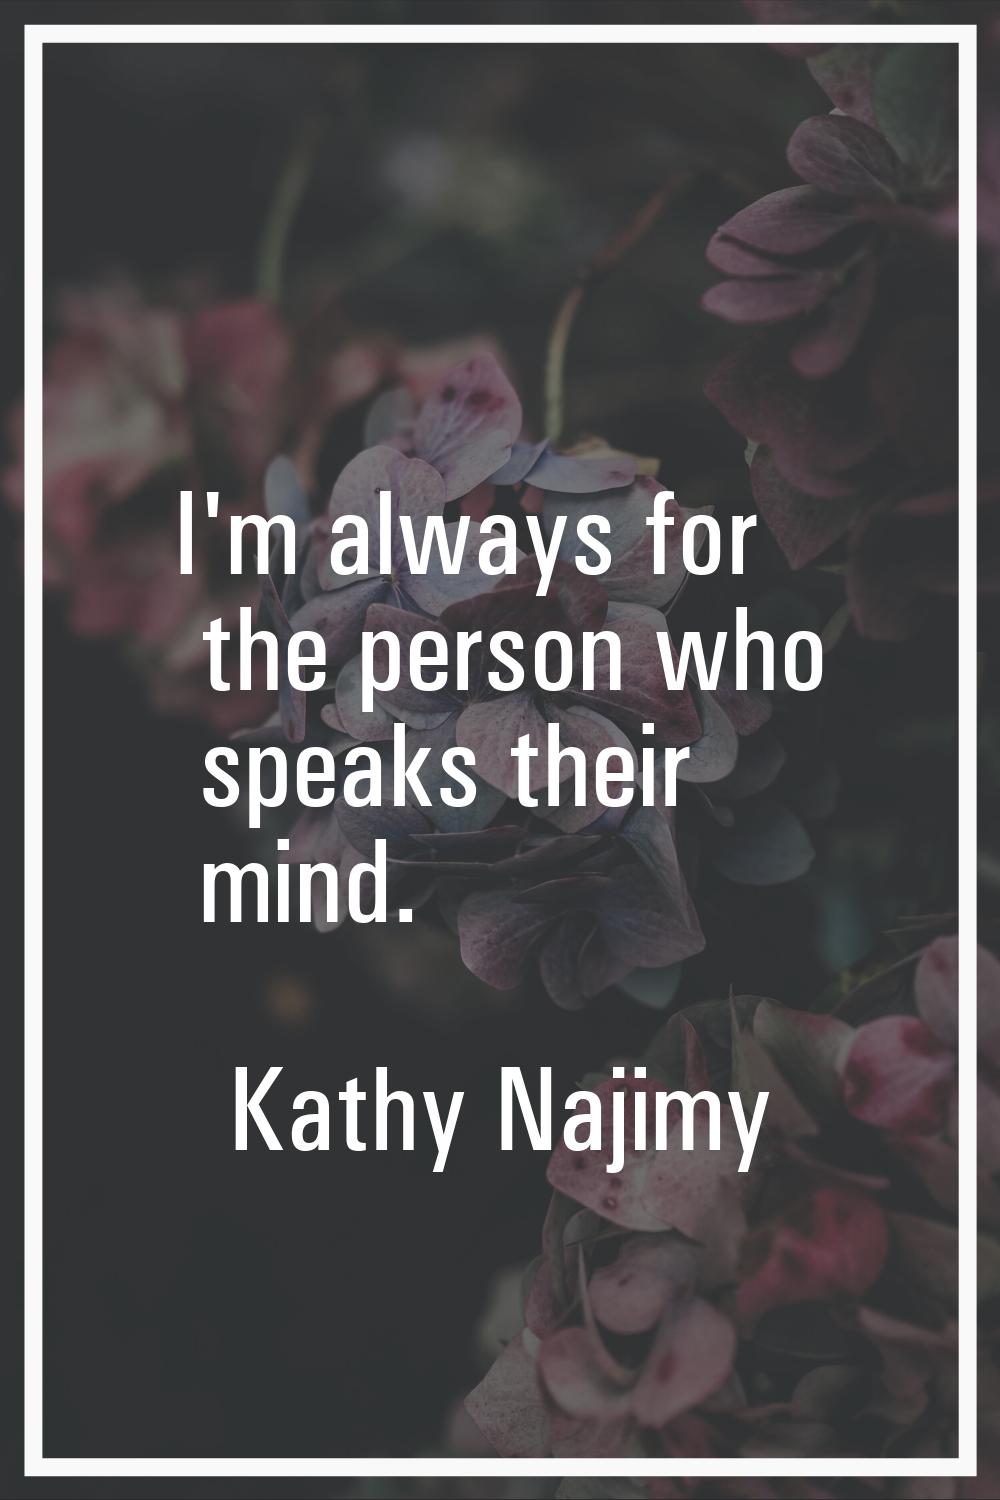 I'm always for the person who speaks their mind.